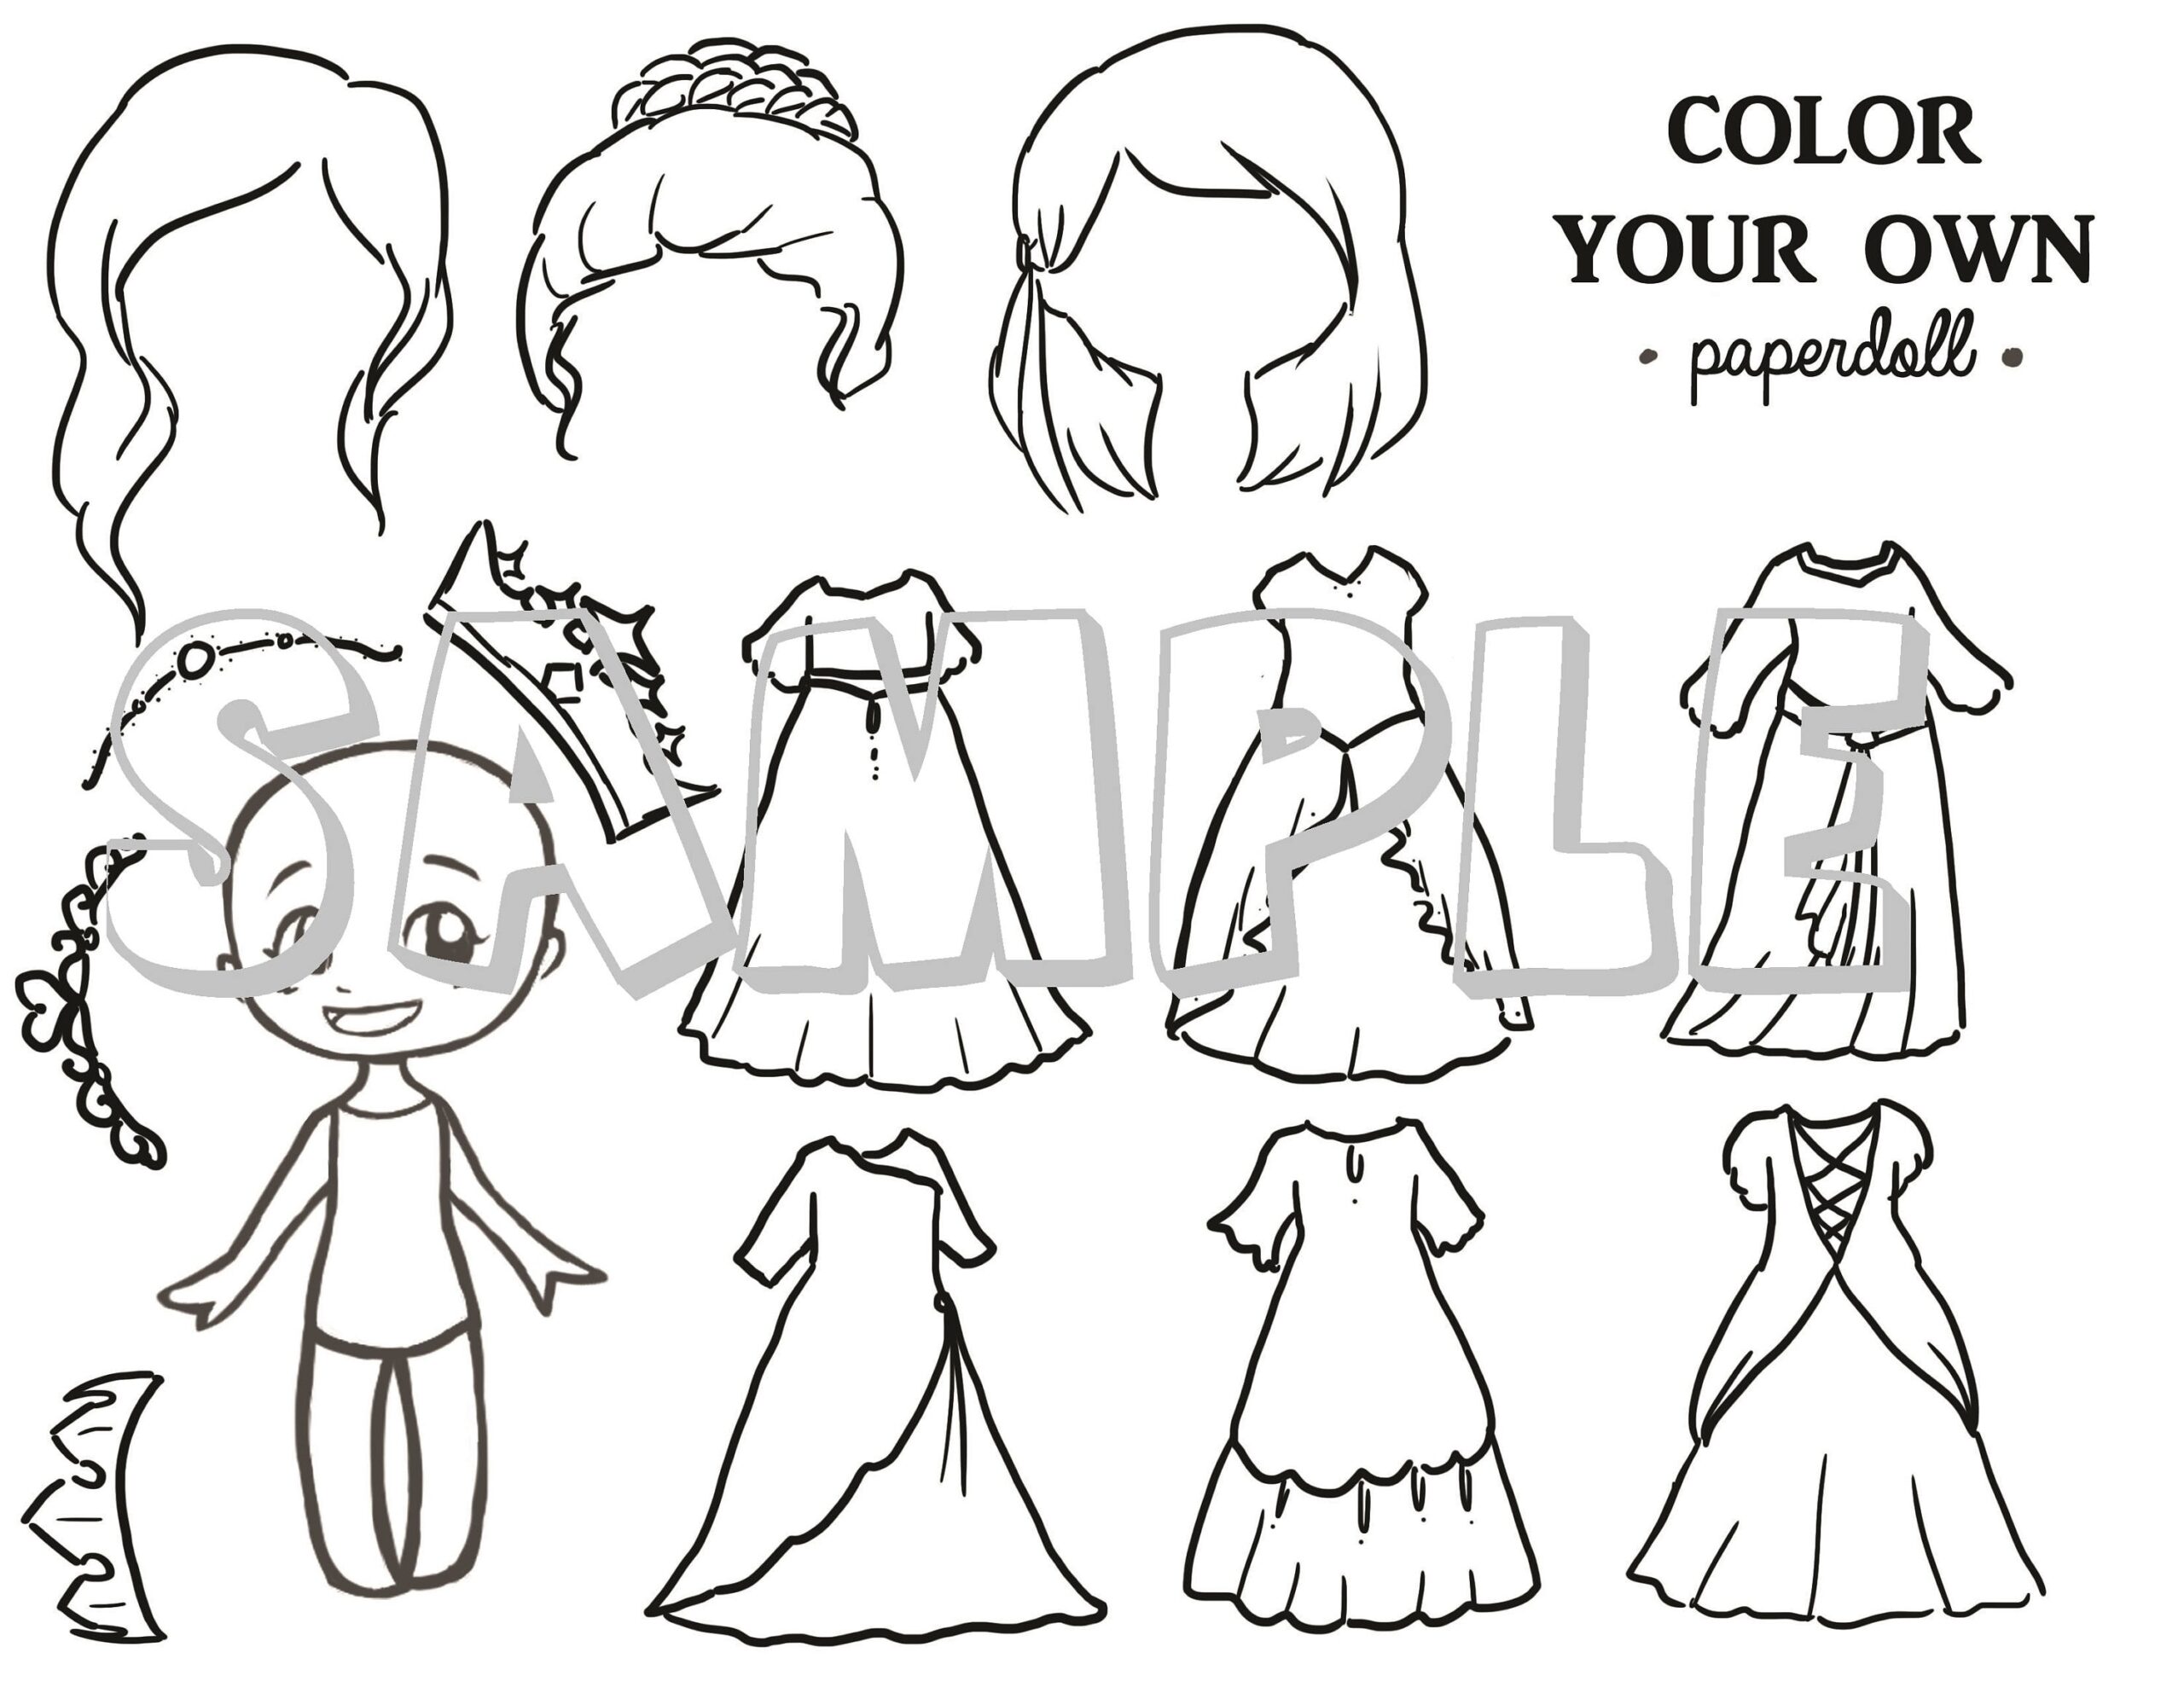 DIGITAL FILE Color Your Own Princess Paper Doll Etsy